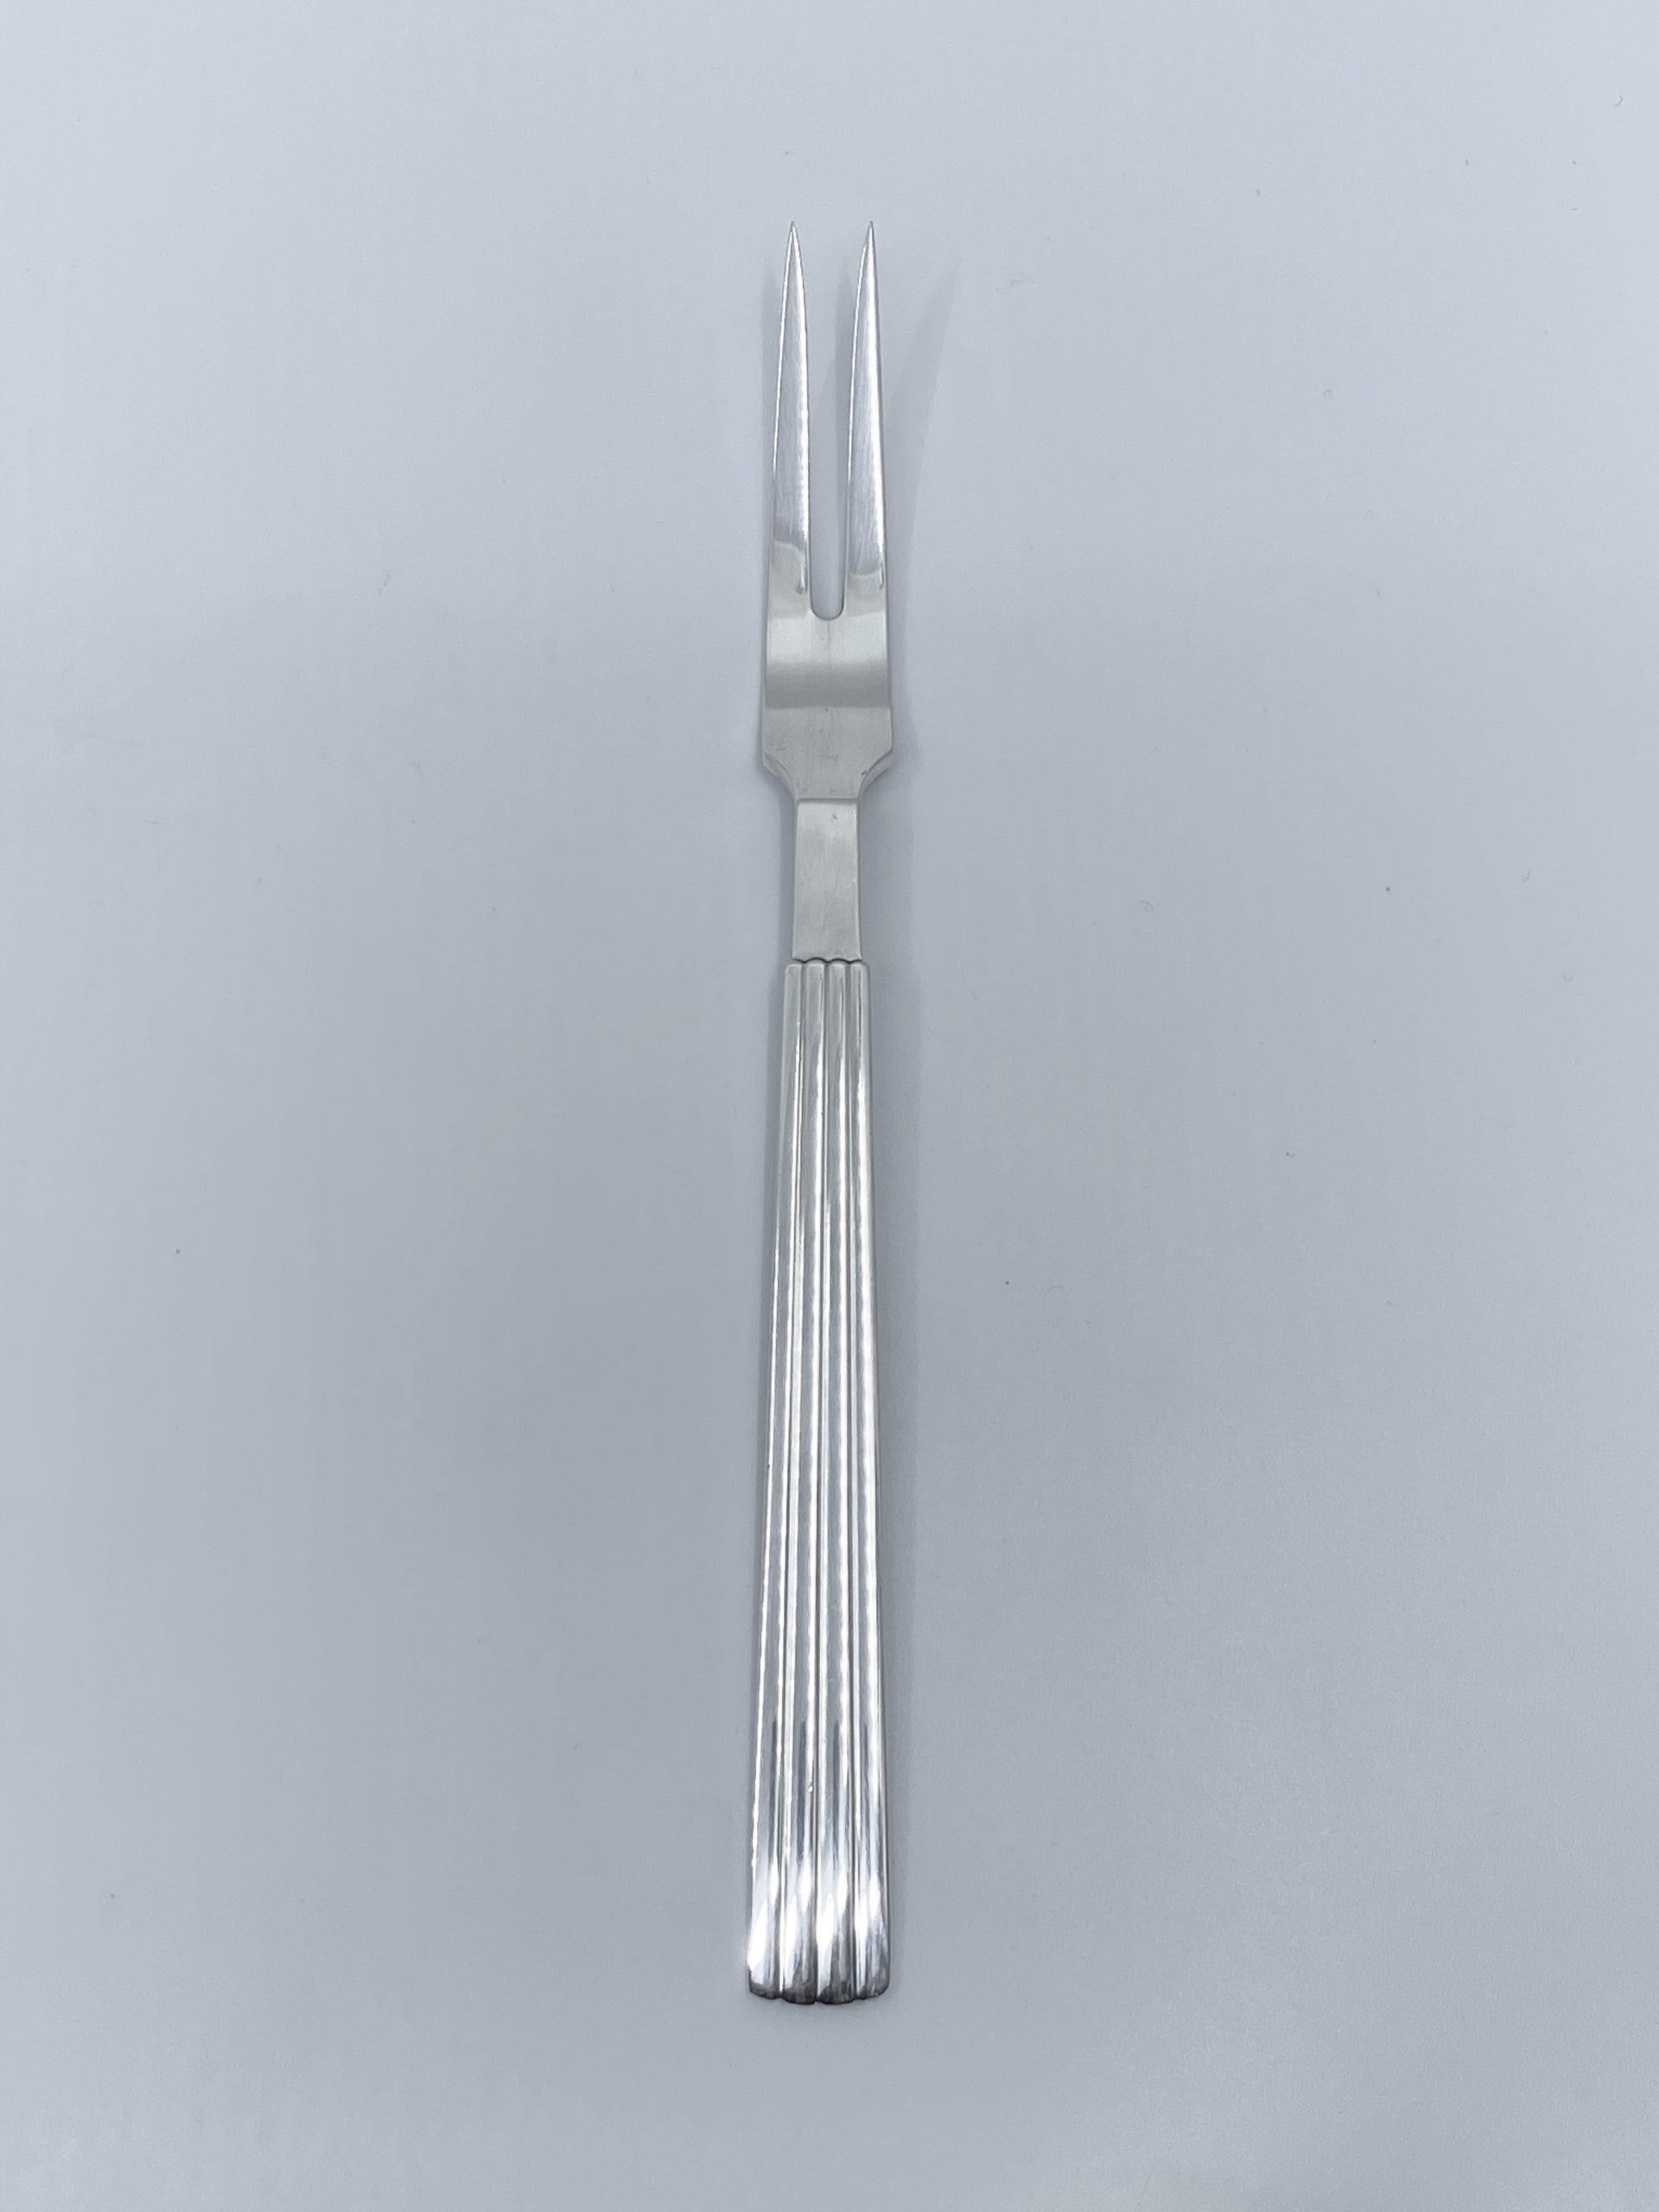 Sterling silver Georg Jensen meat fork, item #143 in the Bernadotte pattern, design #9 by Sigvard Bernadotte from 1939.

Additional information:
Material: Sterling Silver
Style: Art Deco
Hallmarks: With Georg Jensen hallmark, made in